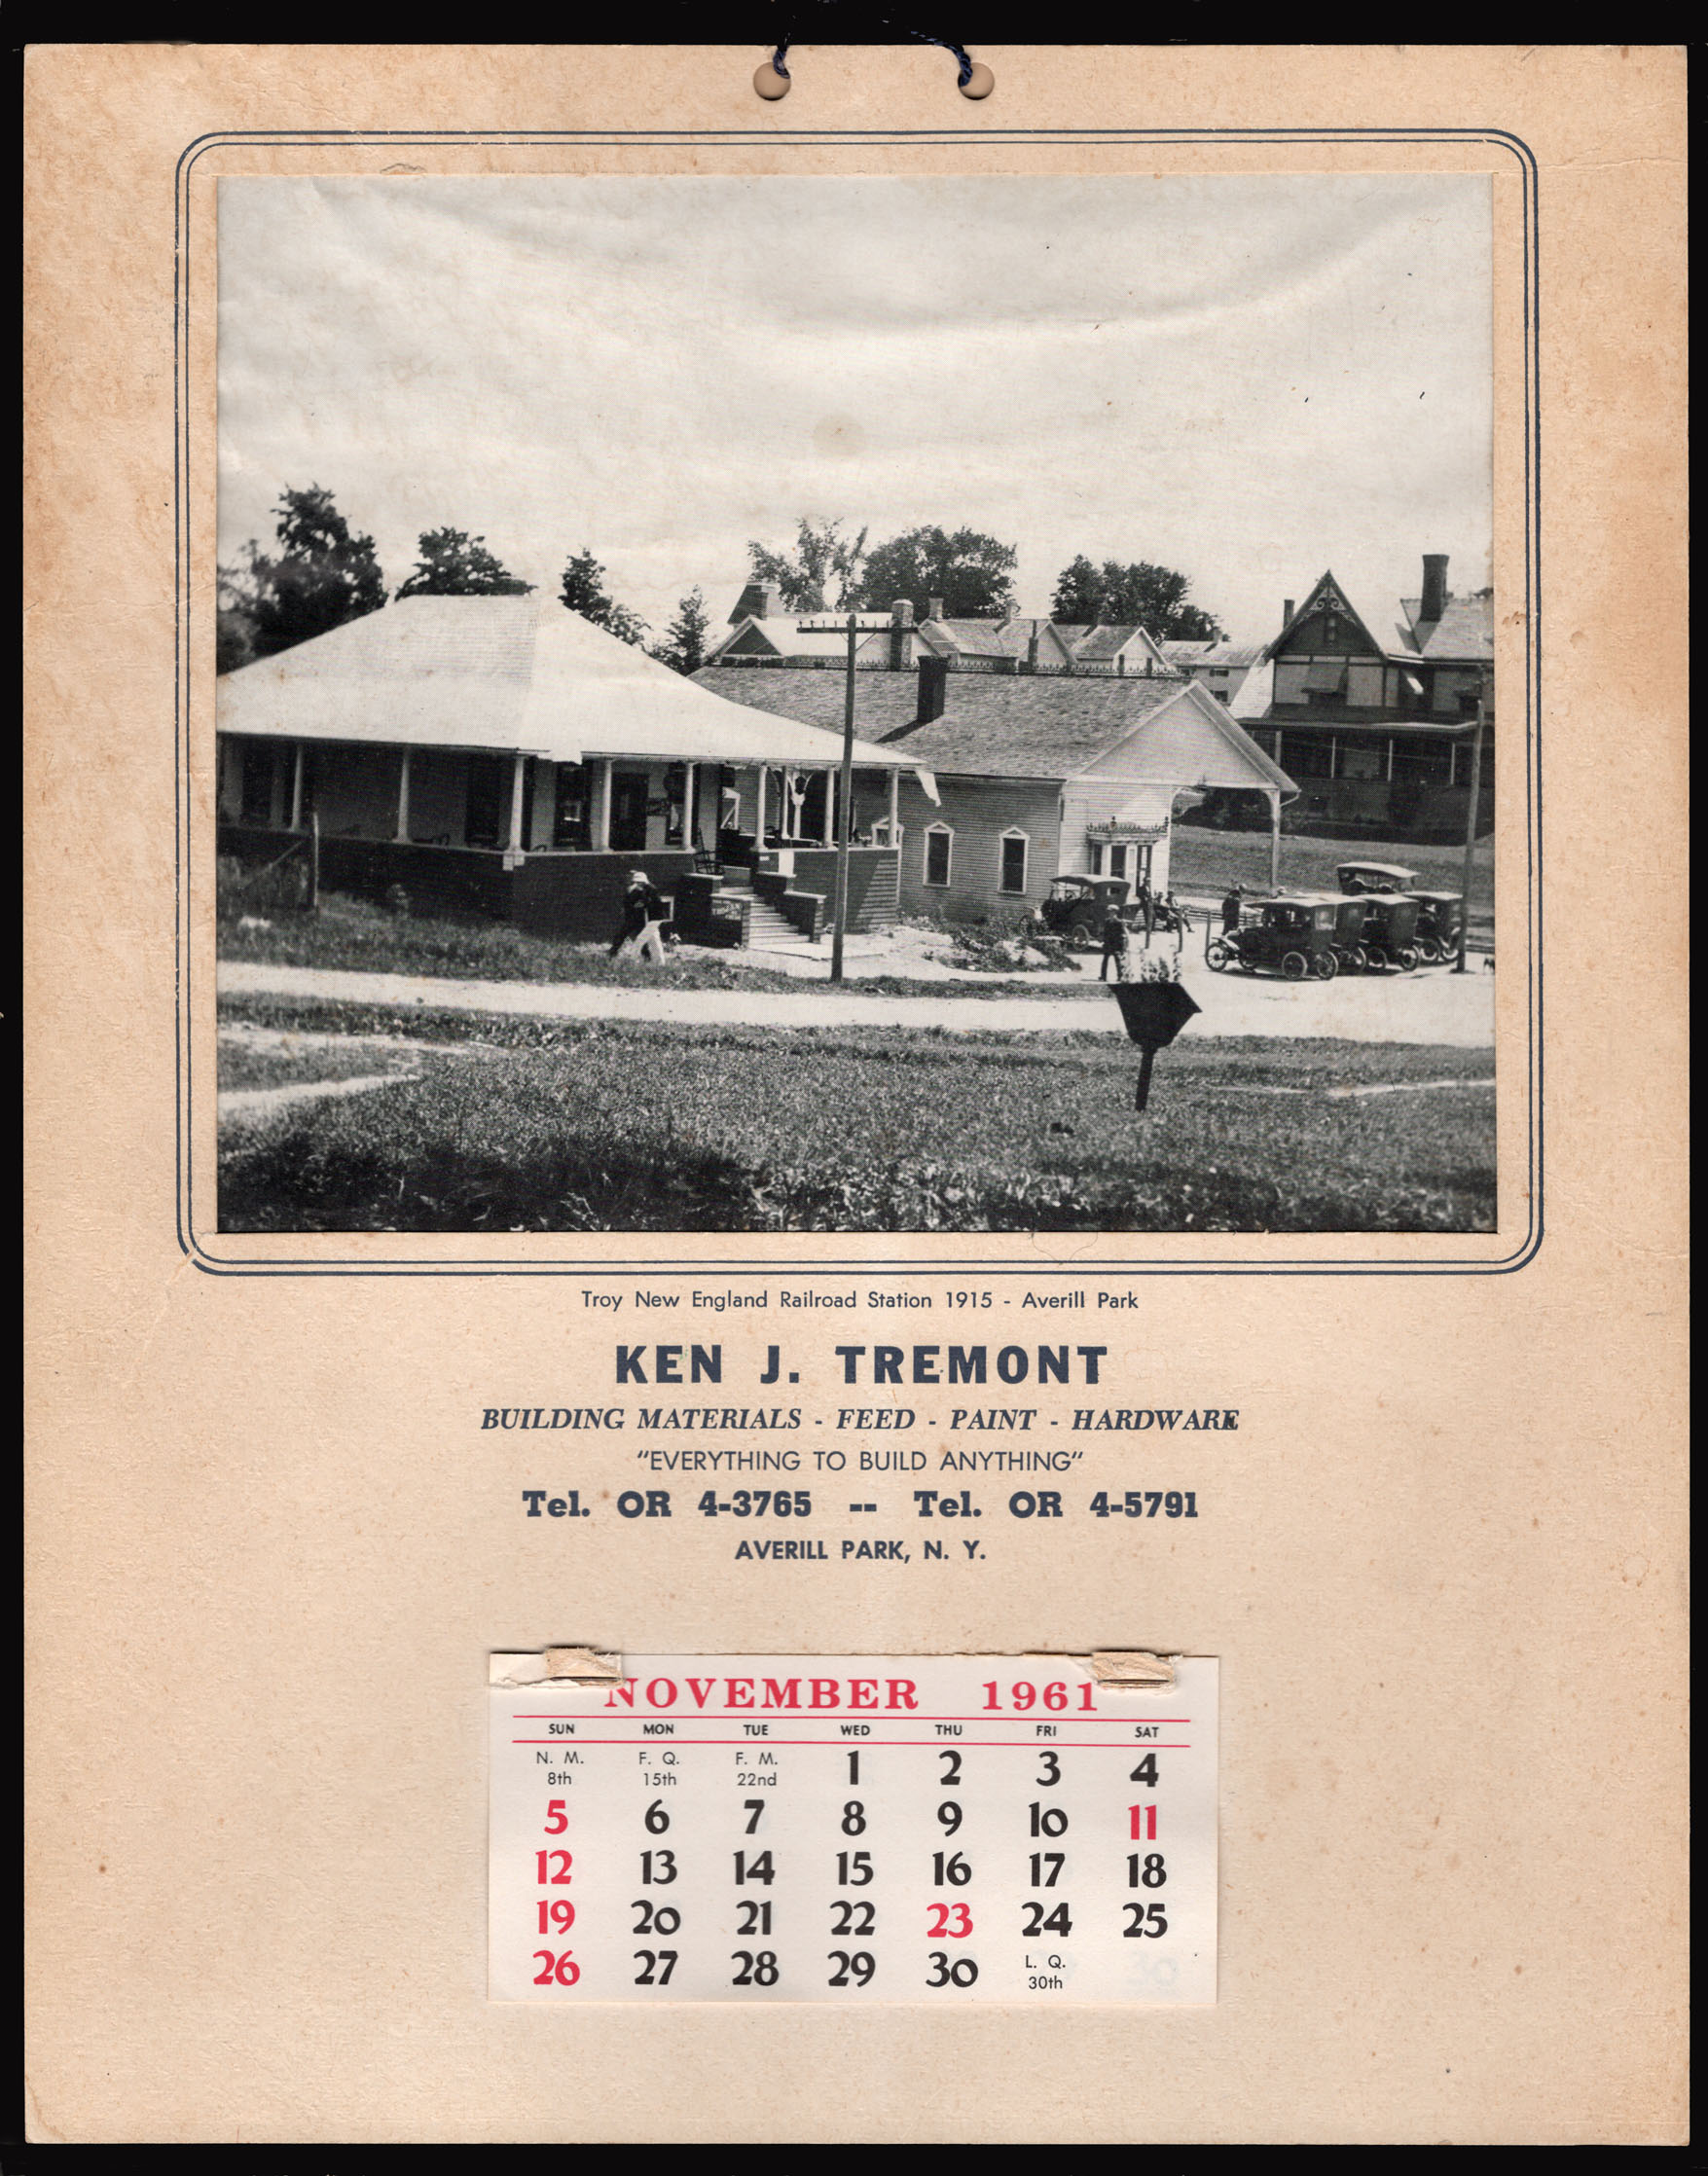 Tremont Lumber Company calendar from 1961.